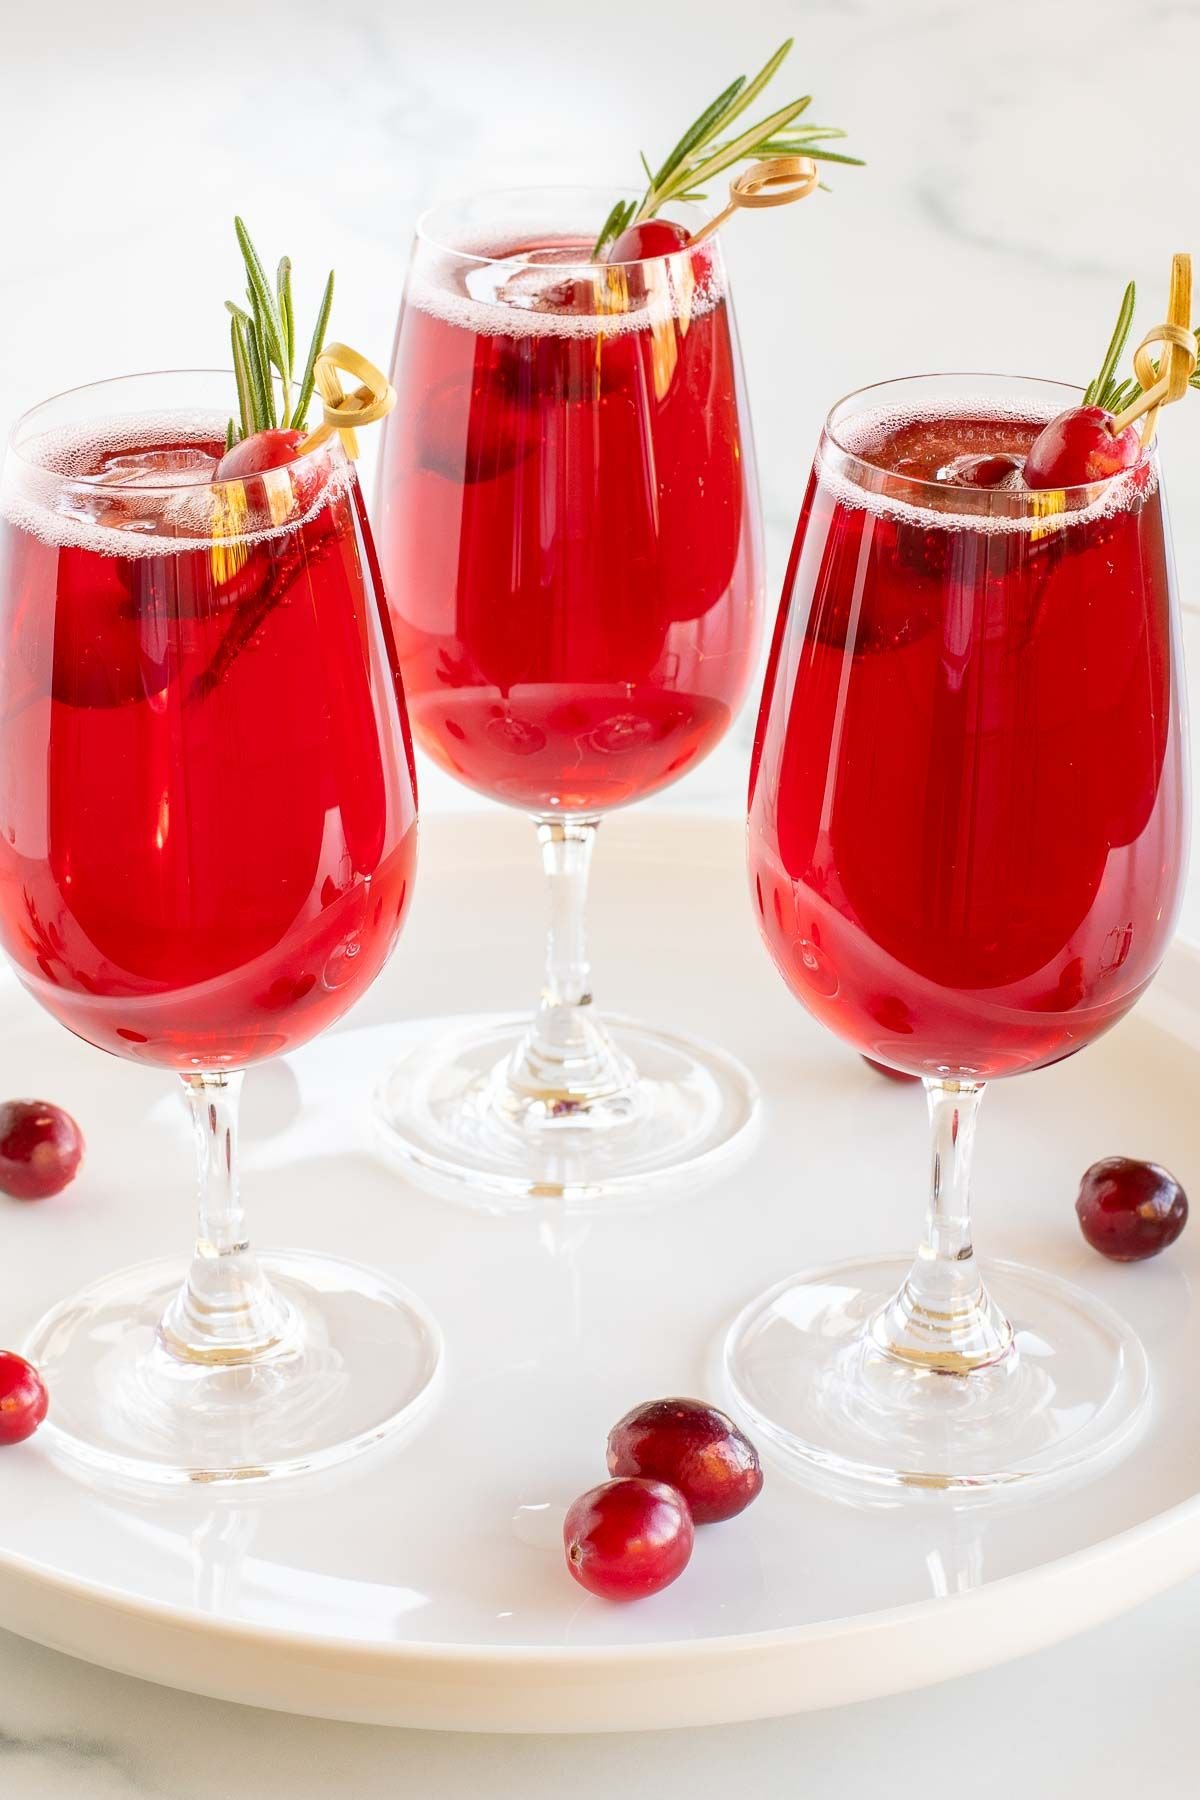 Poinsettia drinks on a white tray, cranberries and rosemary for garnish